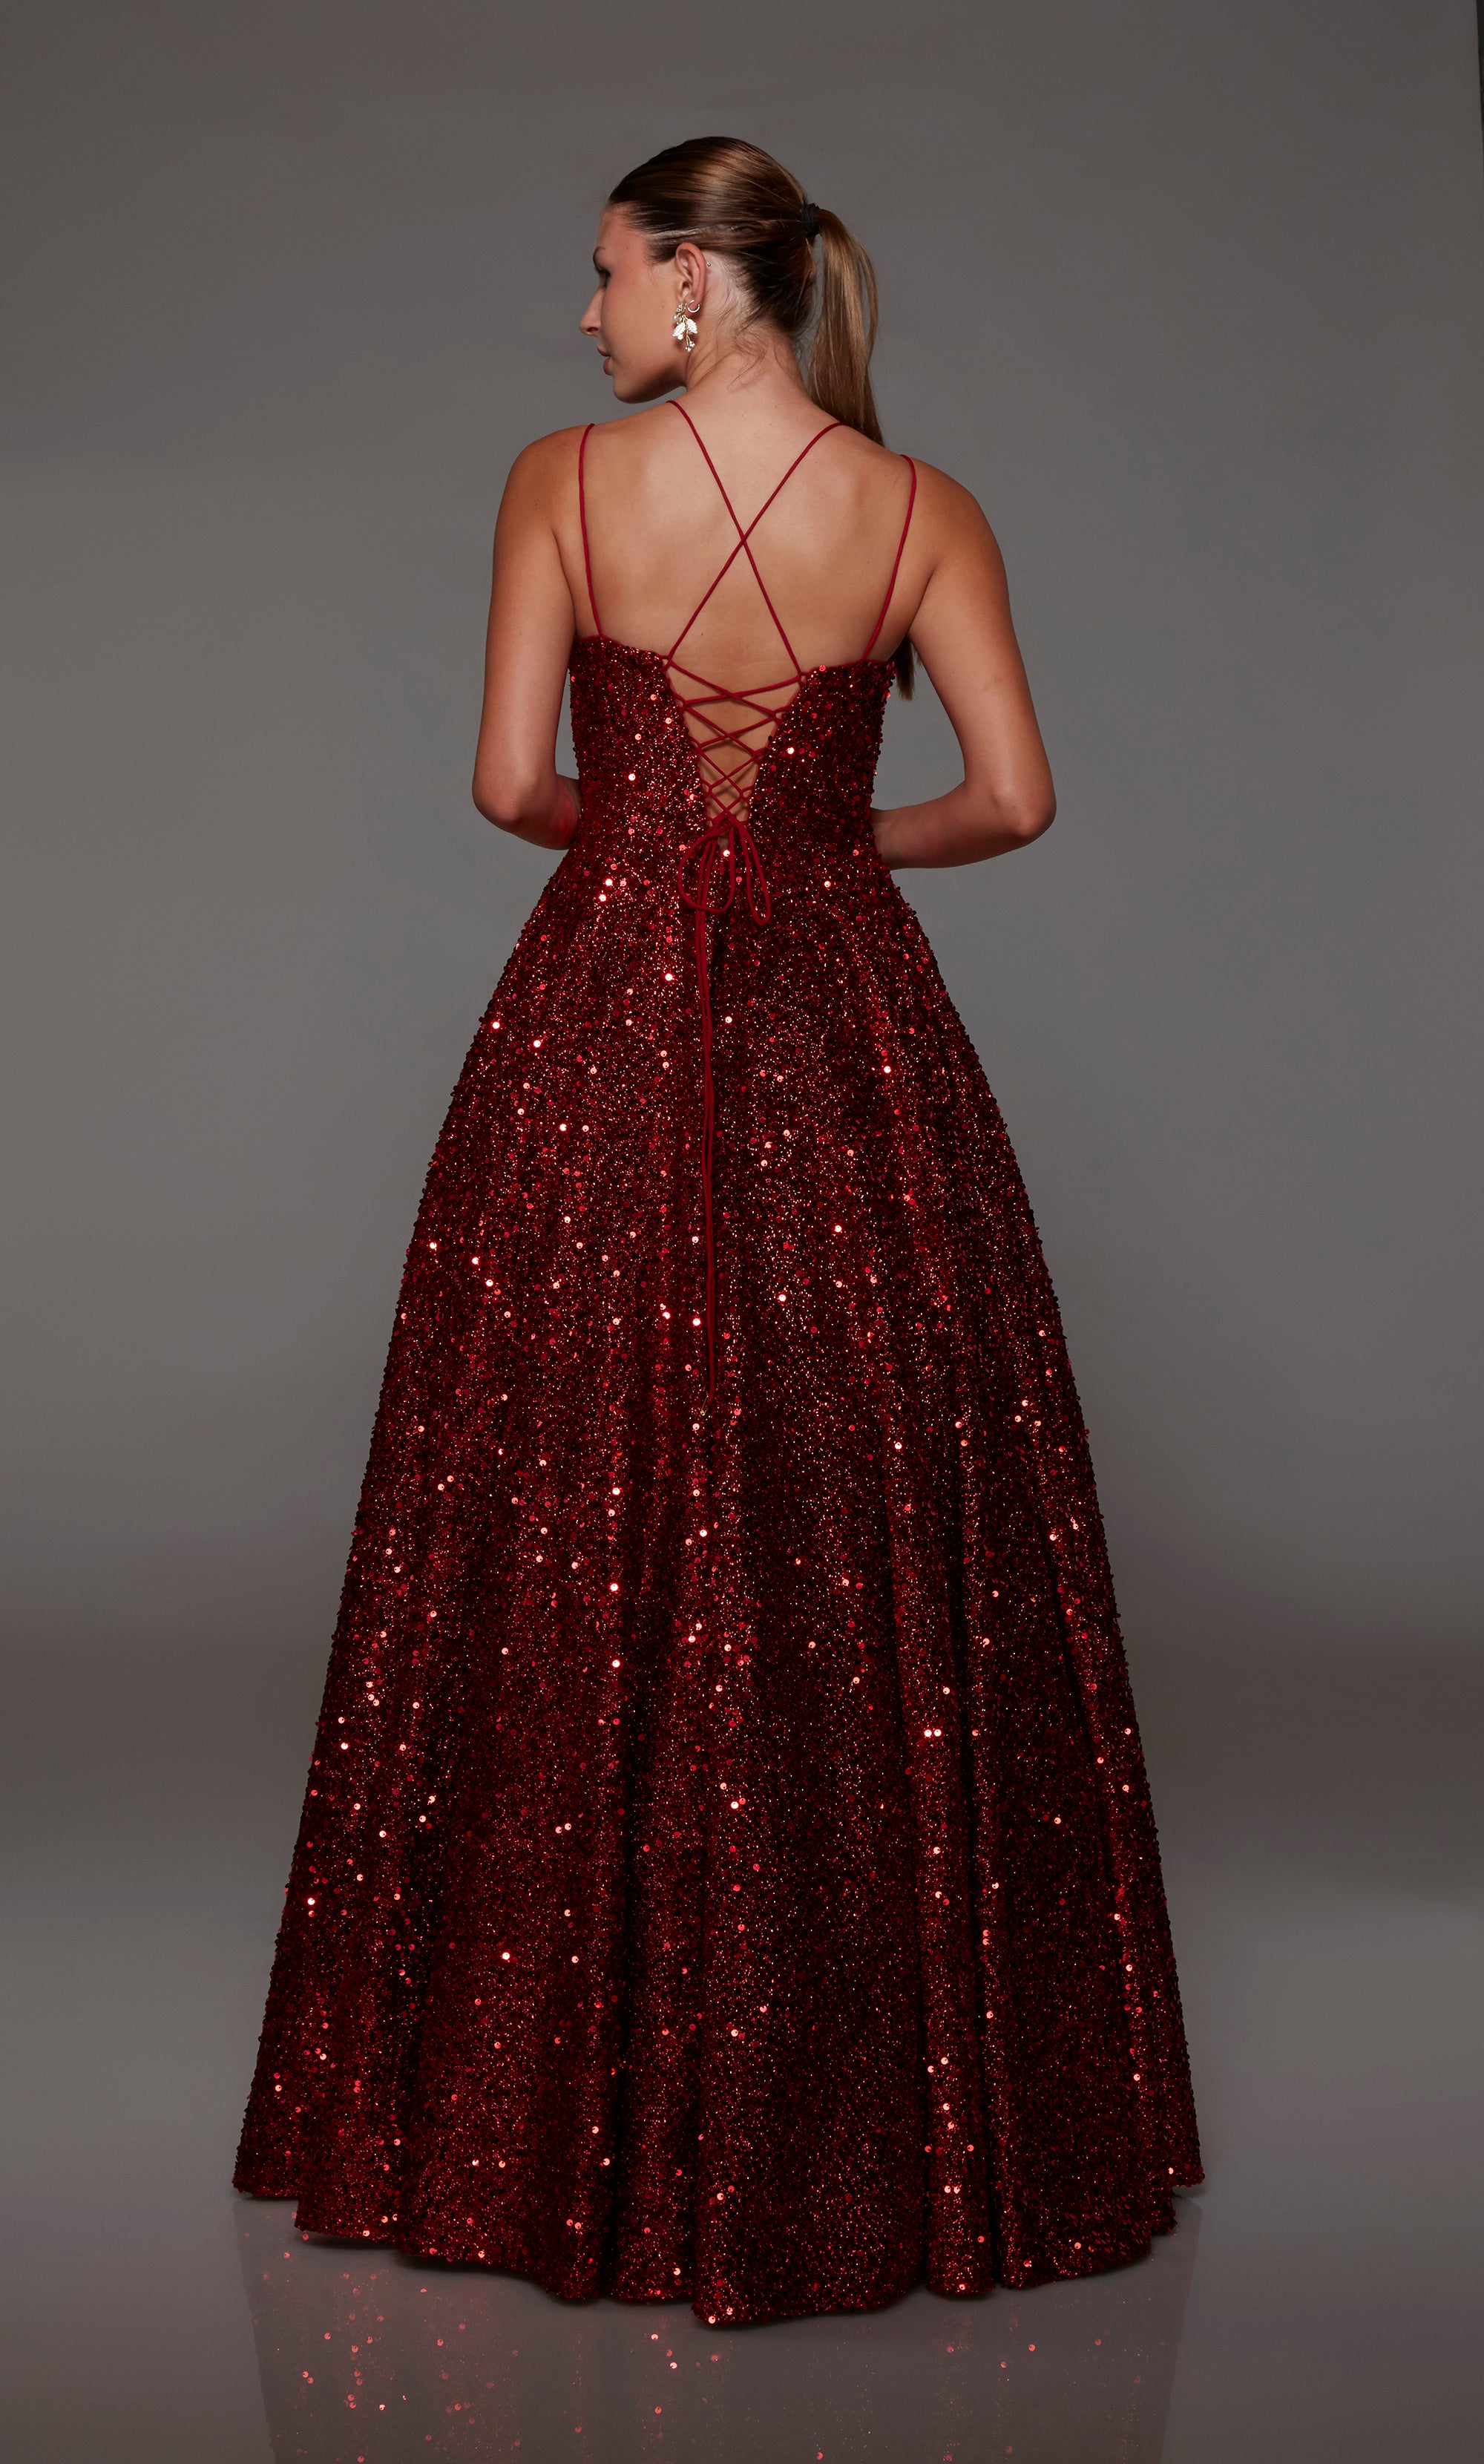 Elegant red A-line prom dress with an V-neck, adorned with sequins, dual straps, and an charming lace-up back.